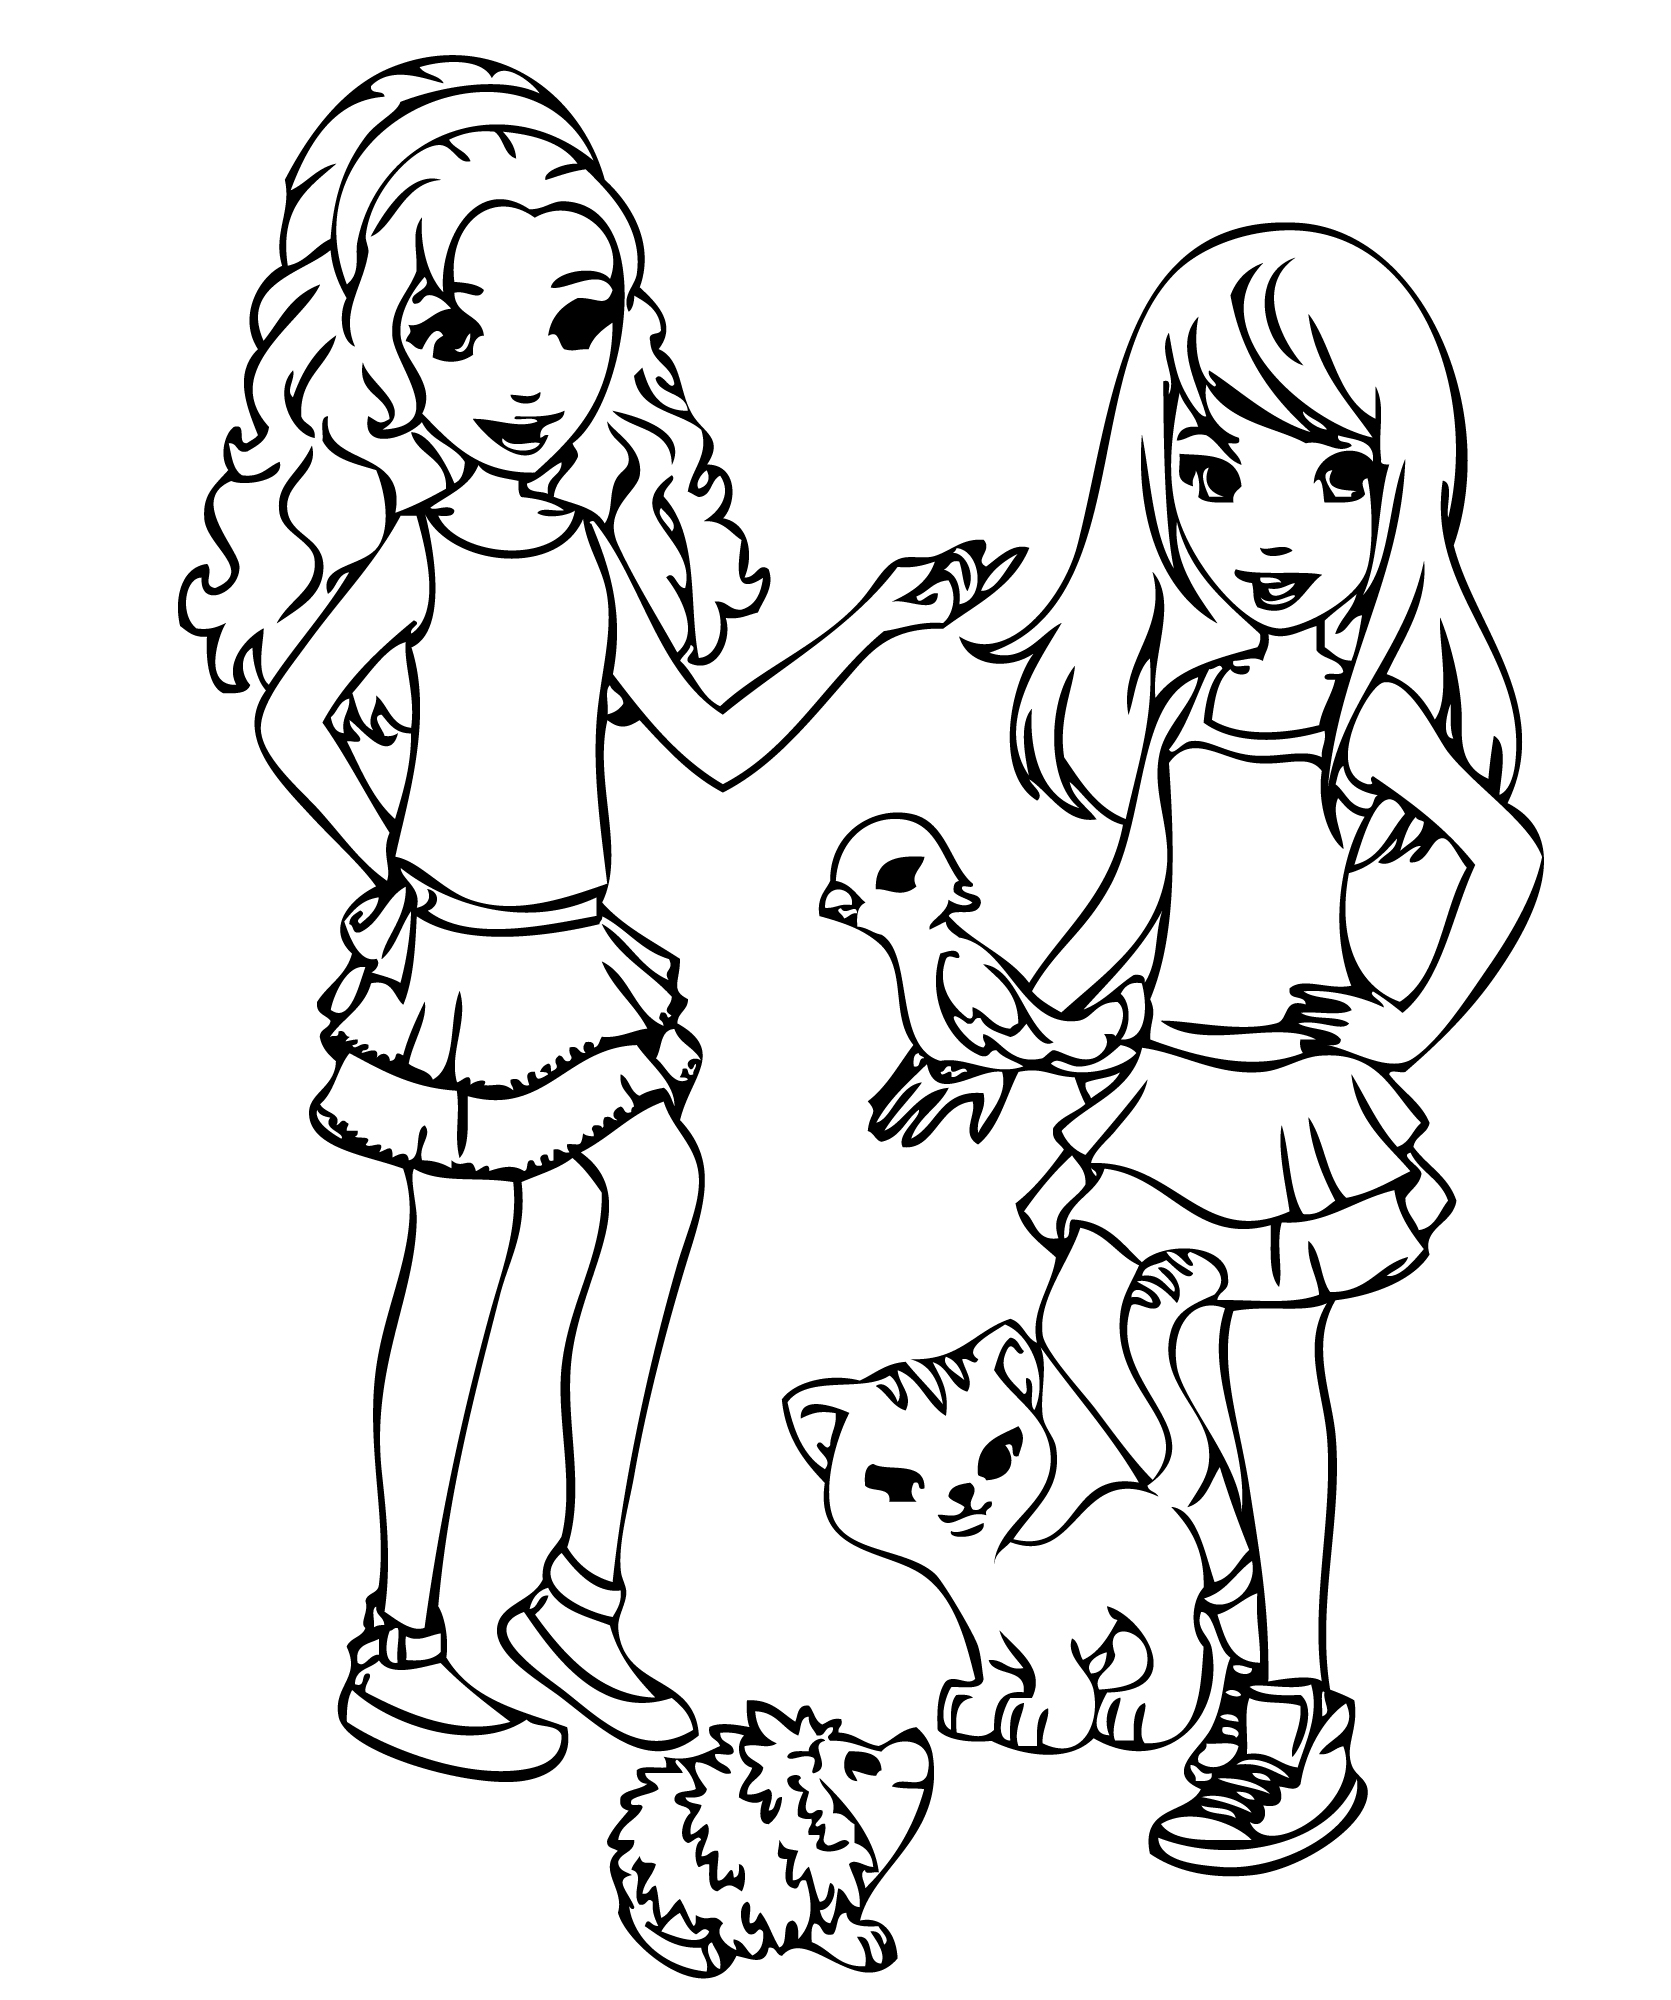 Lego Friends Coloring Pages - For Kids